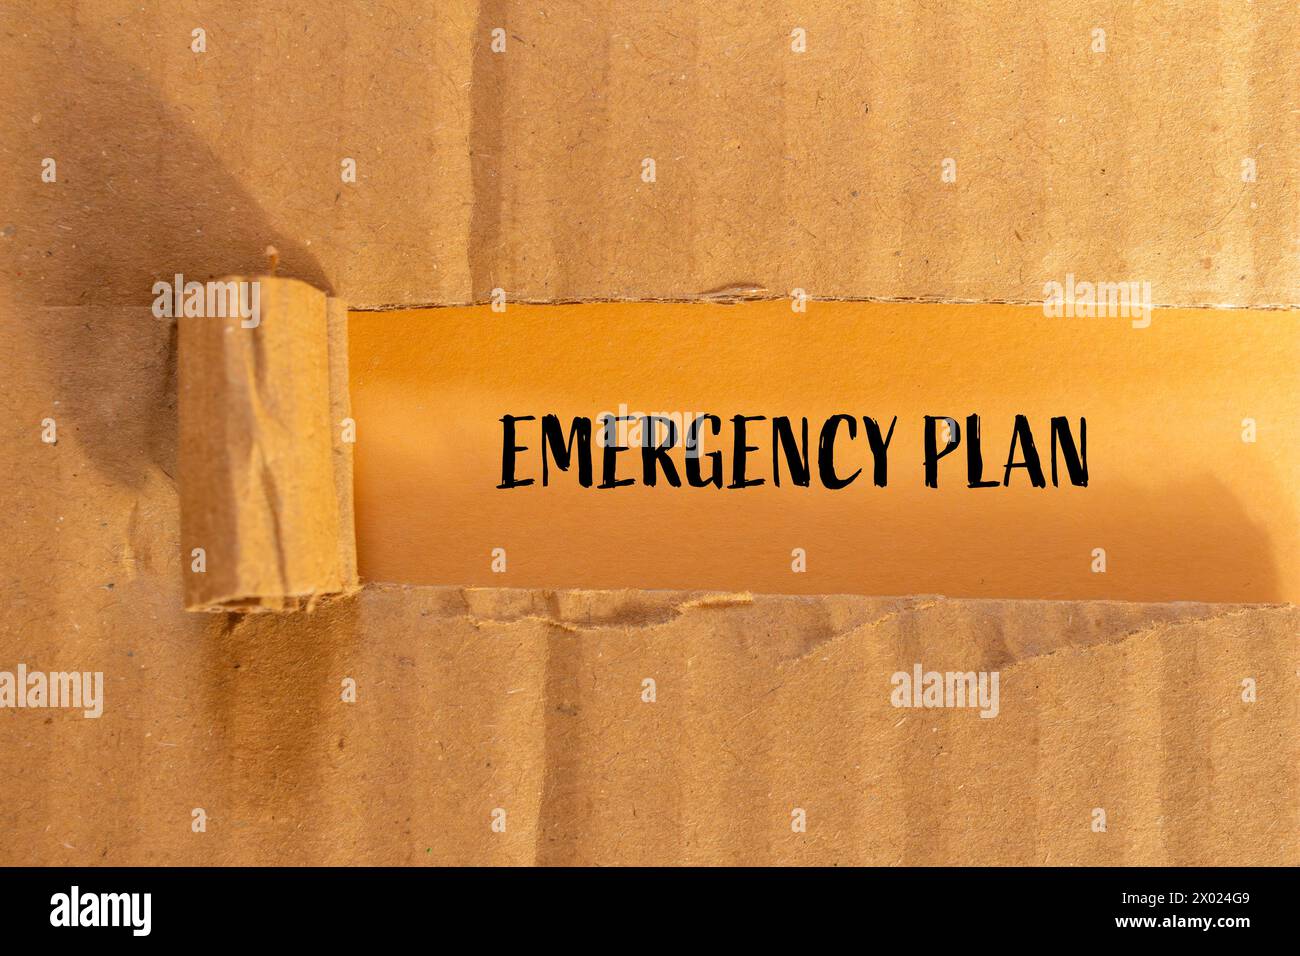 Emergency plan words written on ripped paper with orange background. Conceptual symbol. Copy space. Stock Photo